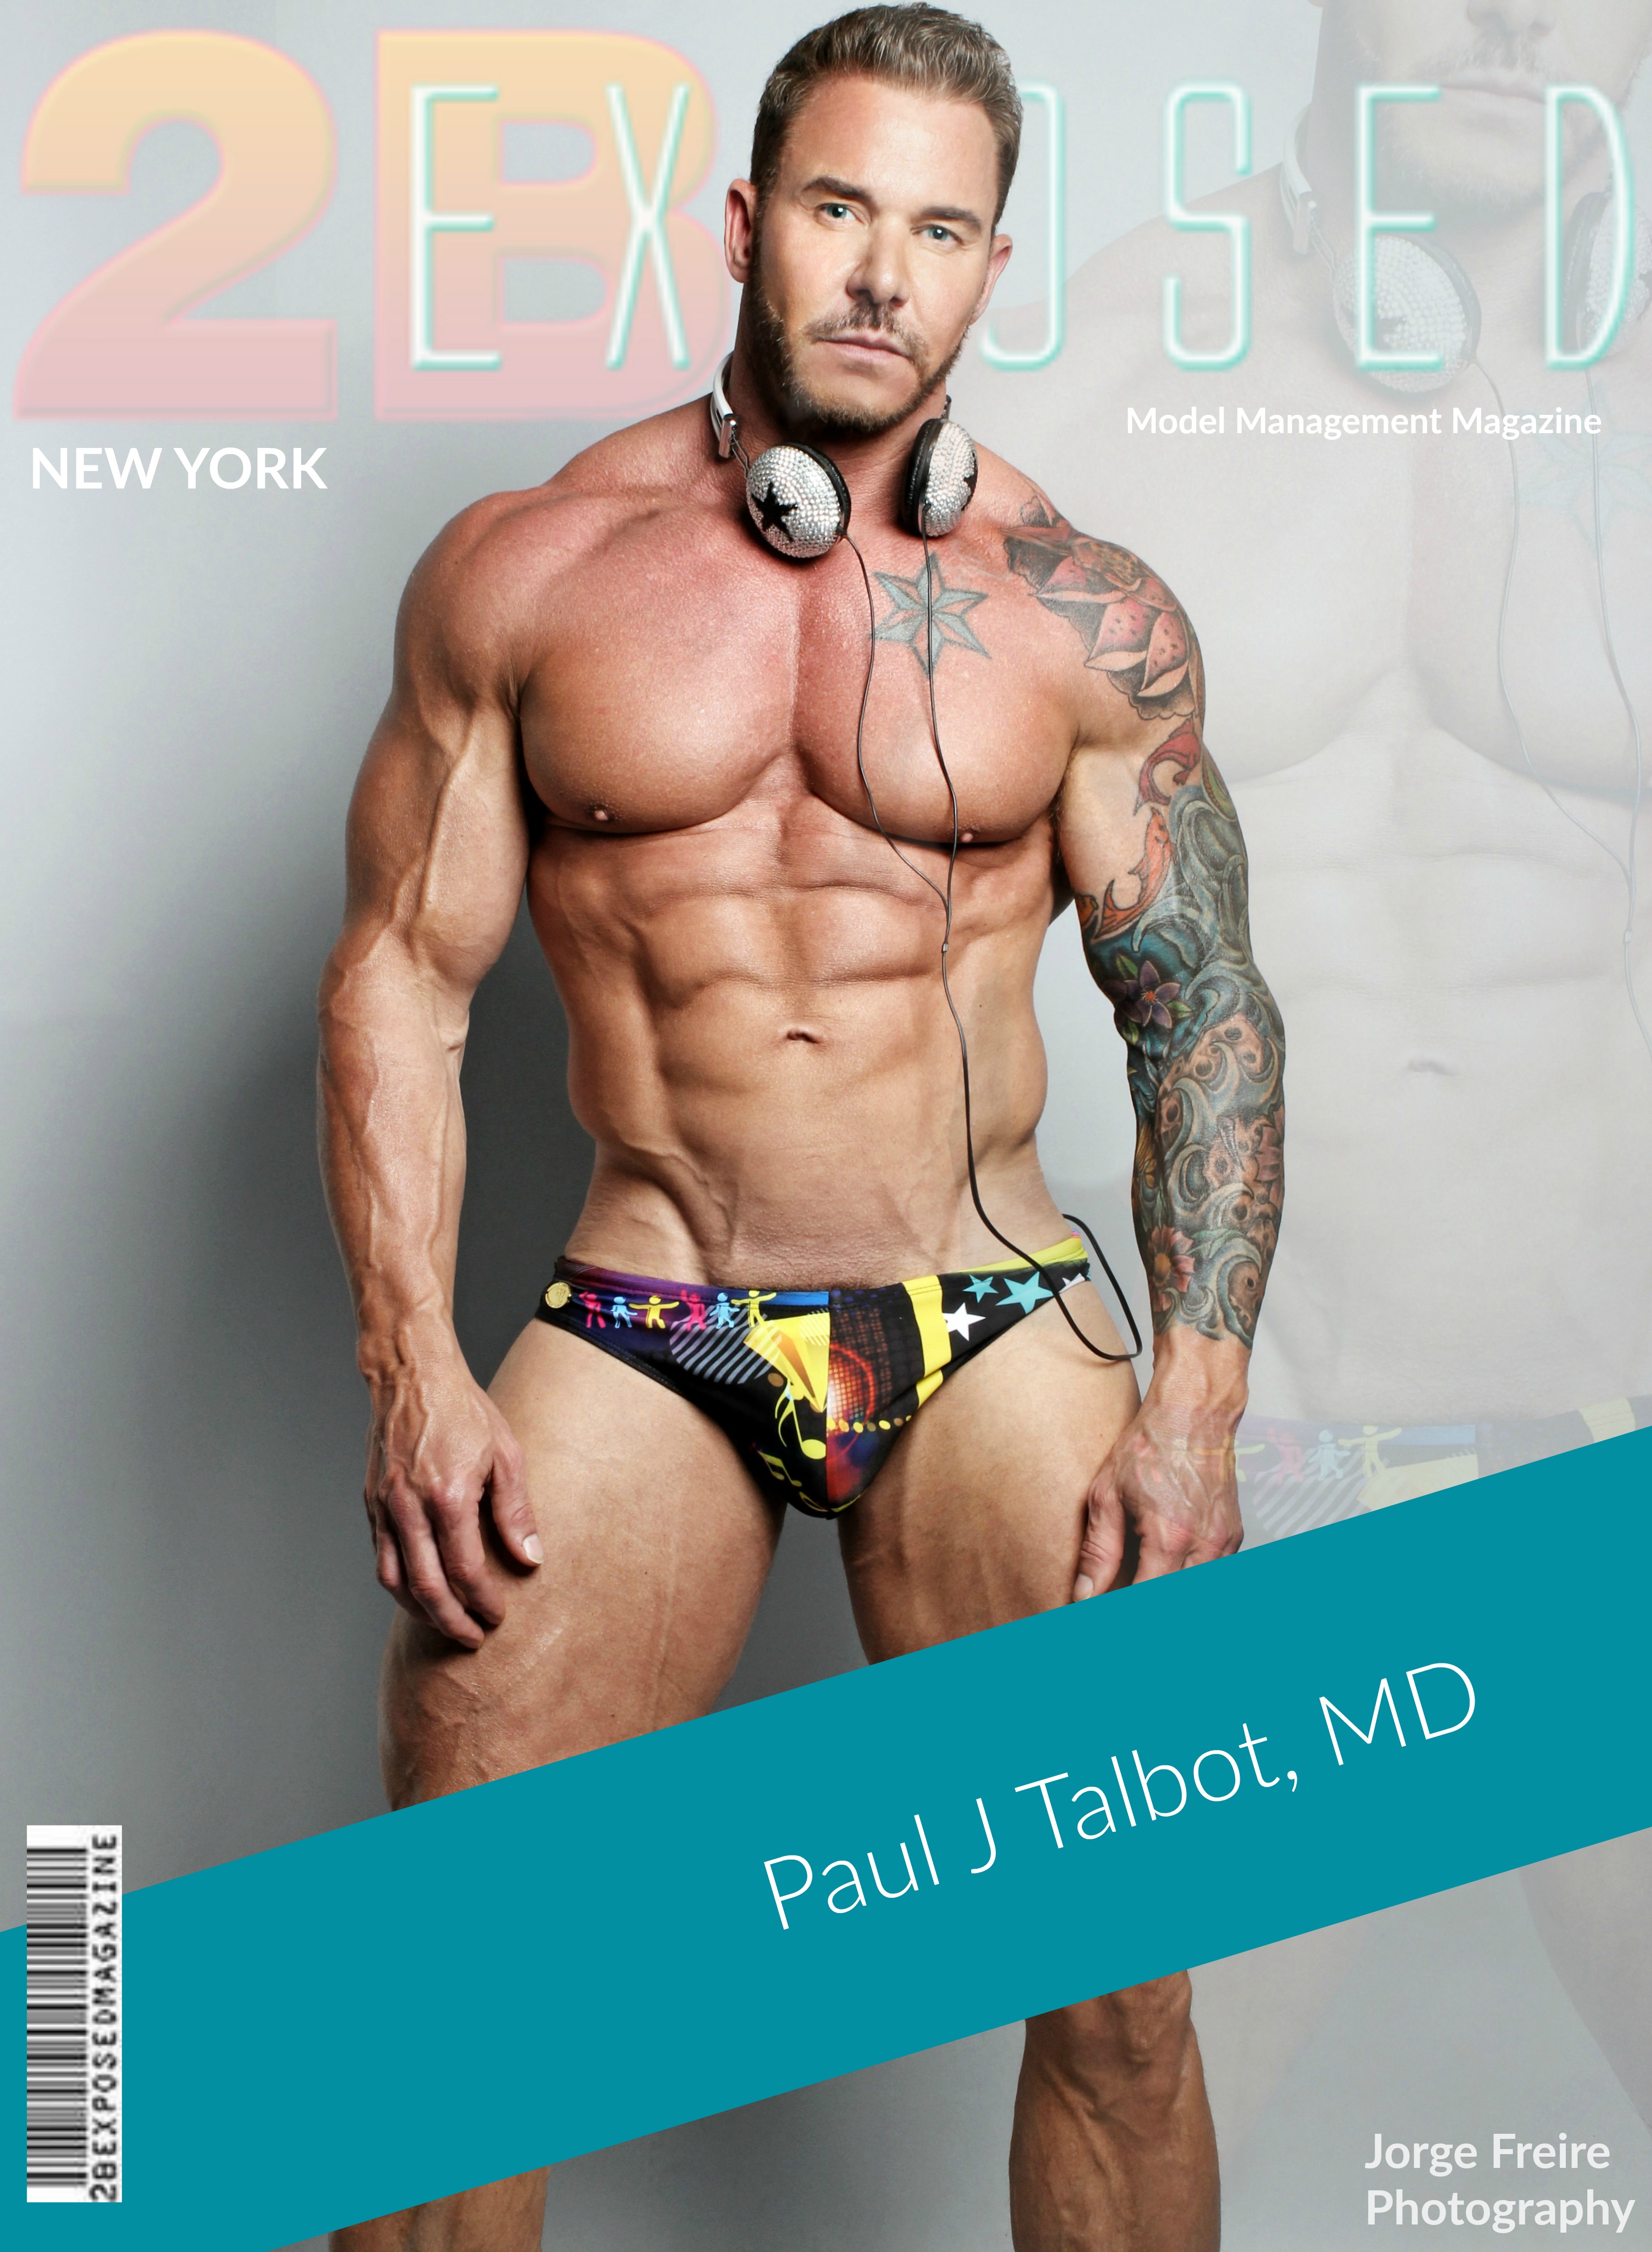 PAUL J. TALBOT, MD. ~ EXPOSED!!! - 2bexposed